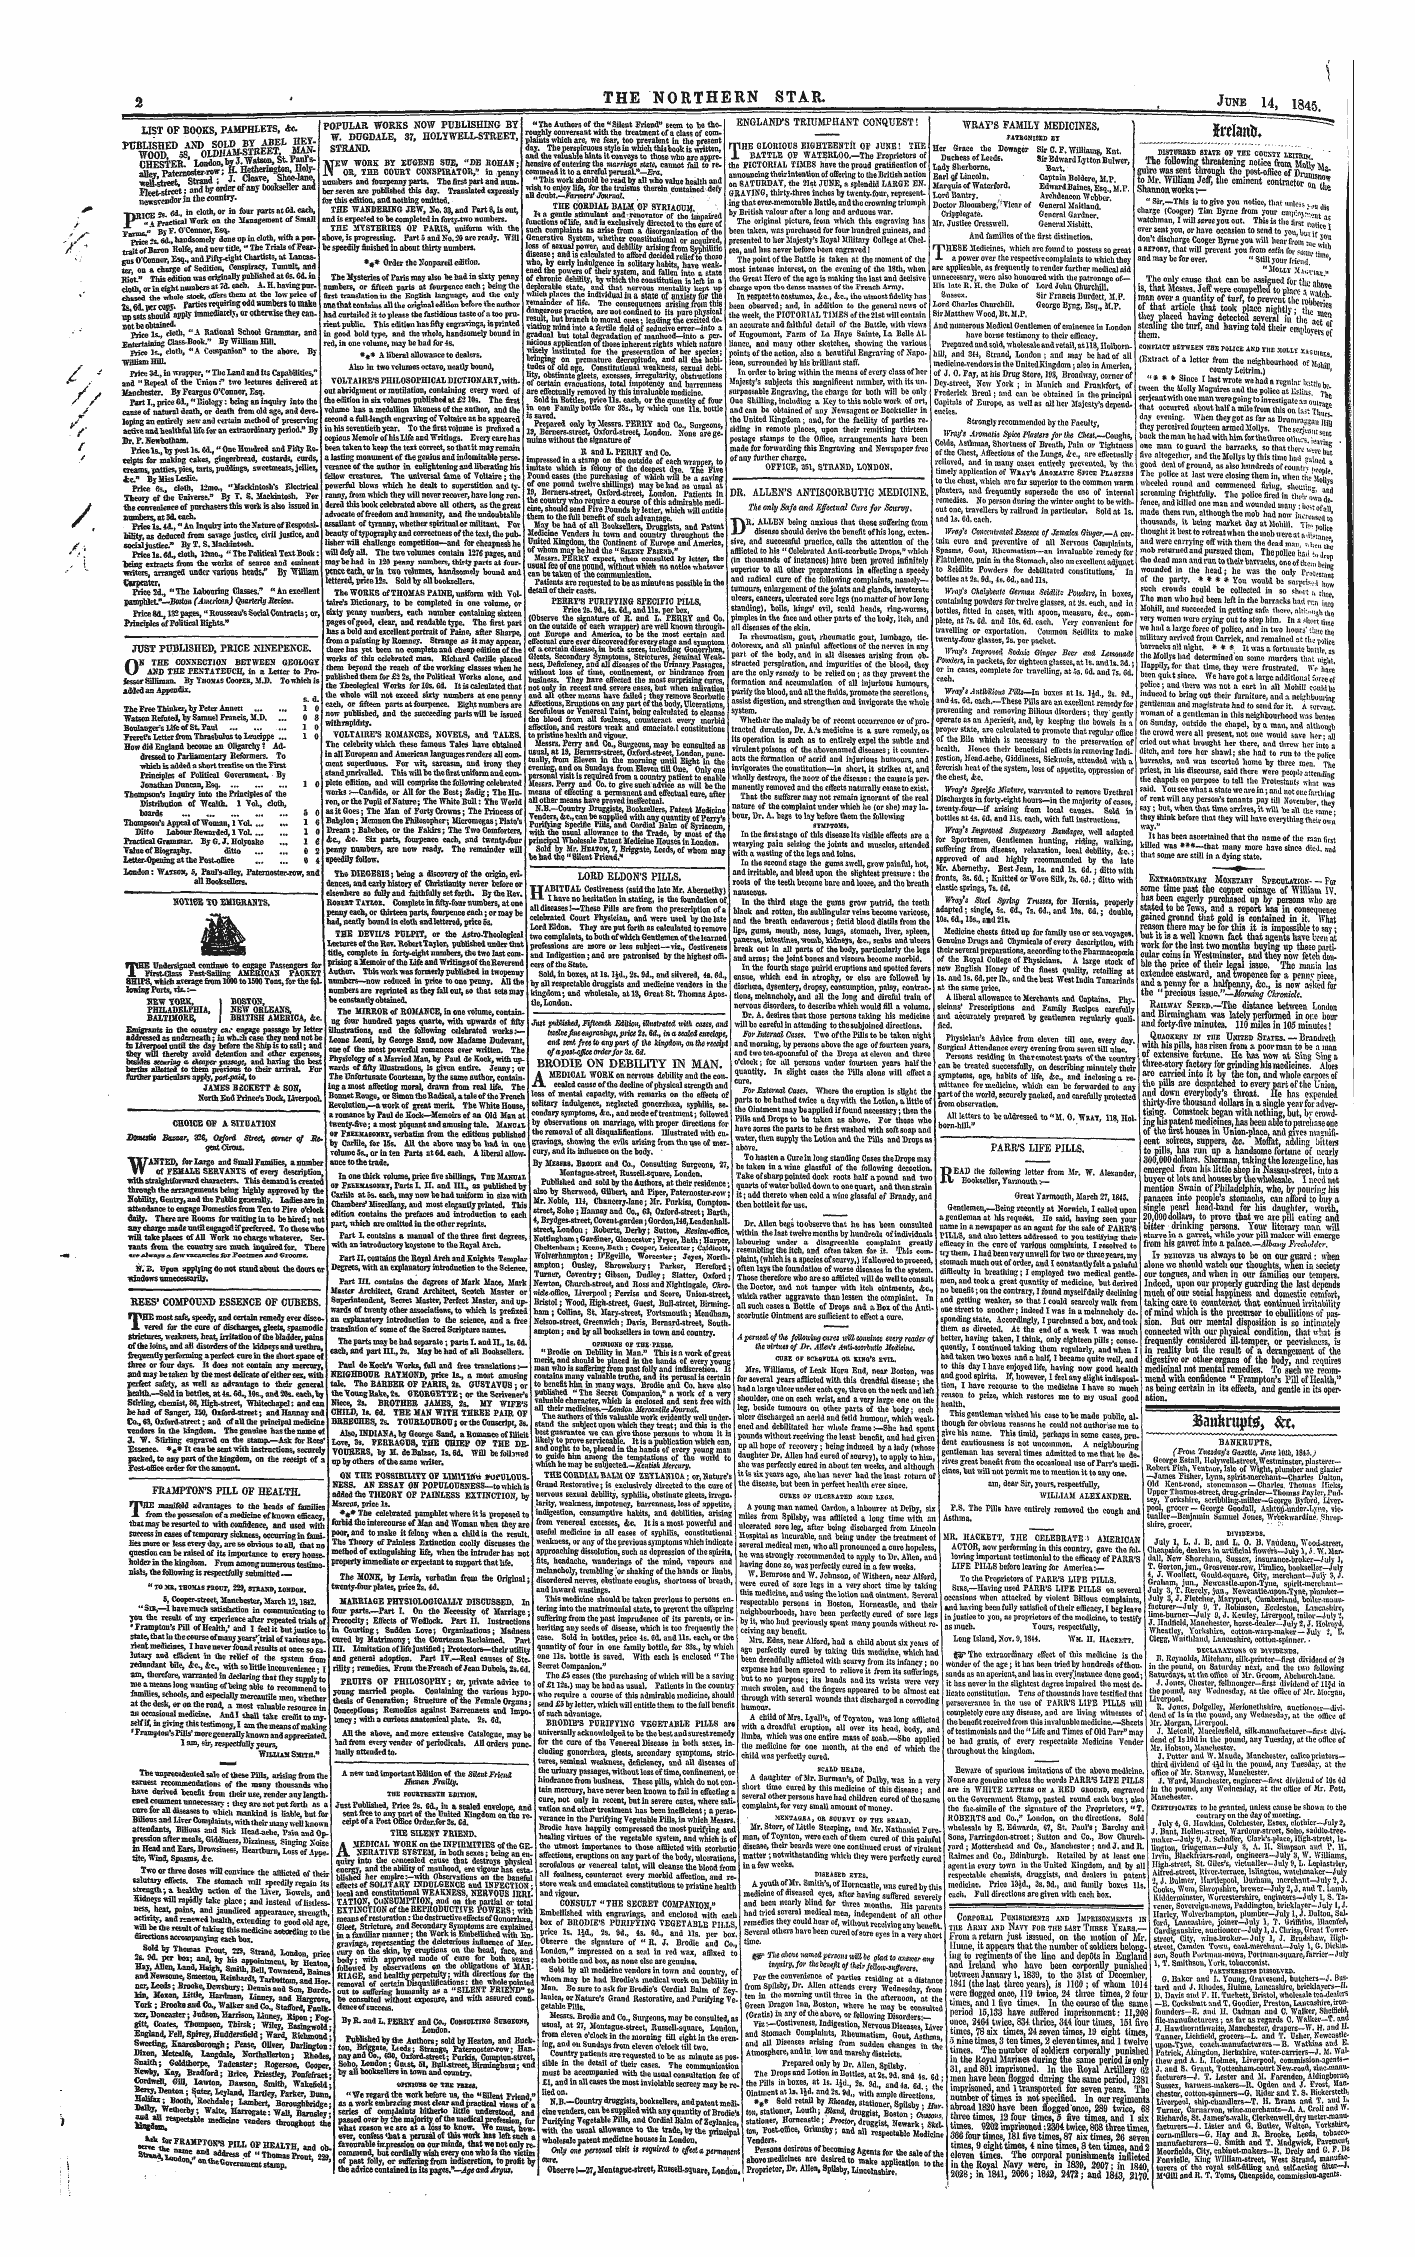 Northern Star (1837-1852): jS F Y, 1st edition - Iiuuiai Juou Isasuuu But1 1 Ul Ml Corpohal Punishments And Imprisonments In The Army And Navy For The Last Threk Years.— I* *T/M% Rt I^Ntiinn Iiict Intinnail #Tx1*A »«T_* A» «*I? A£" -.